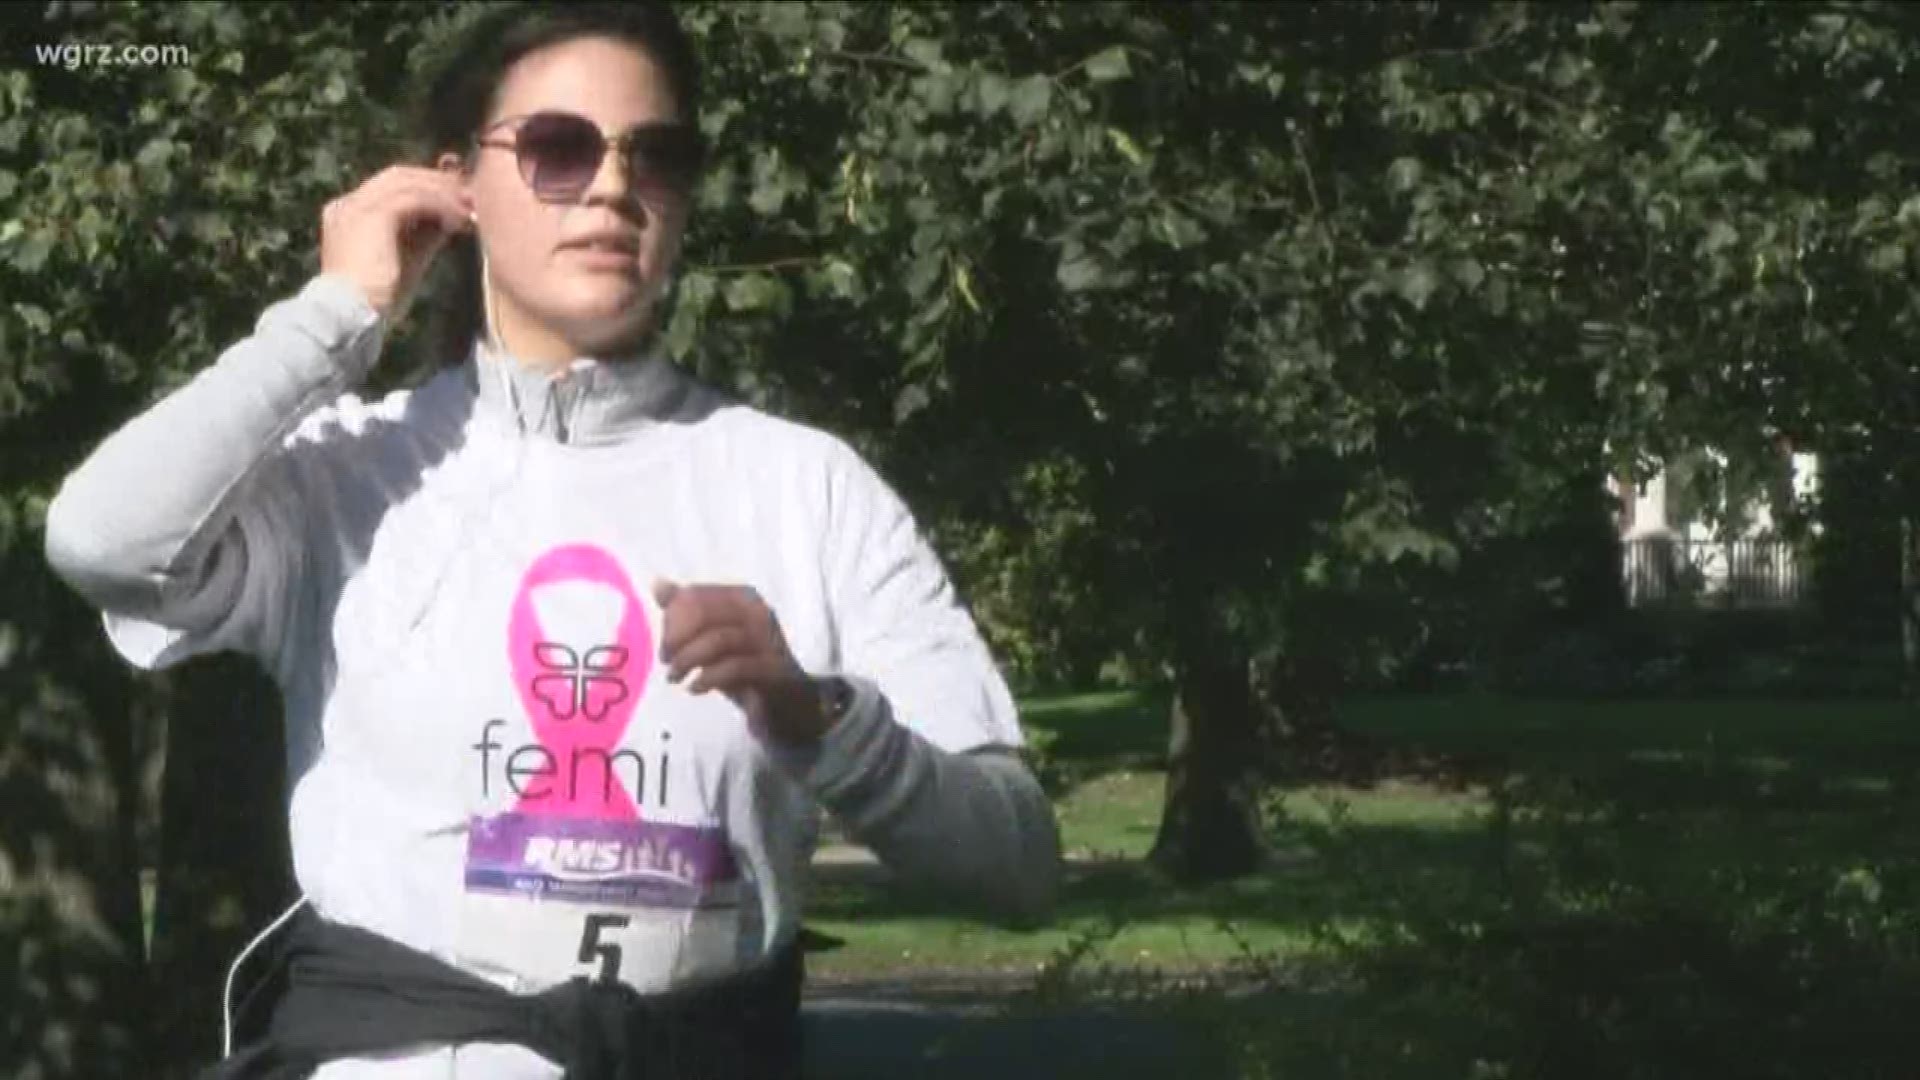 The 43North winner uses her company to raise awareness for breast cancer.